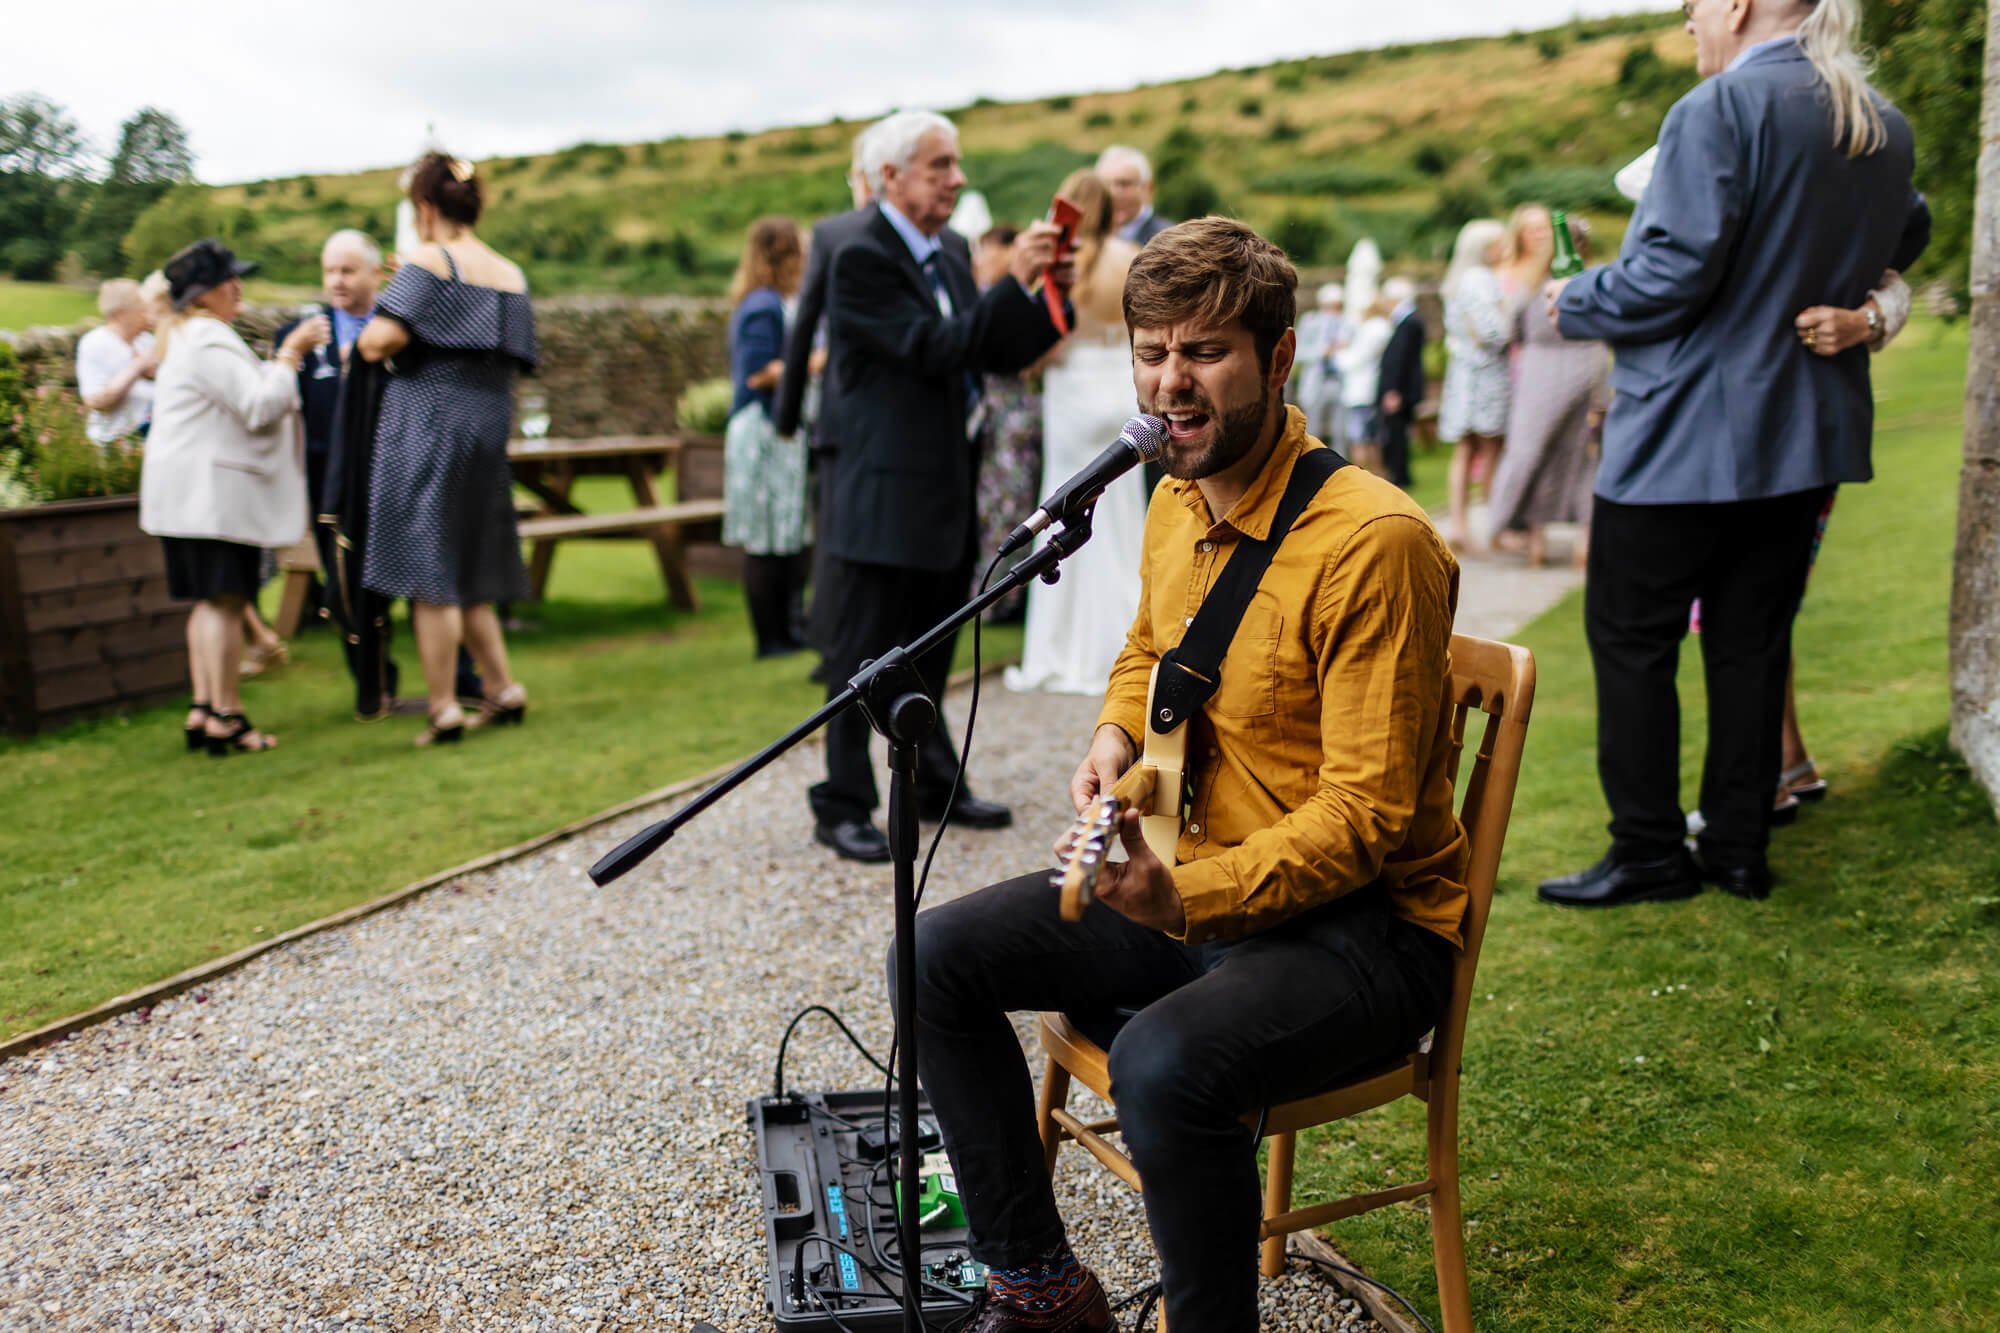 A musician singing and playing the guitar at a wedding